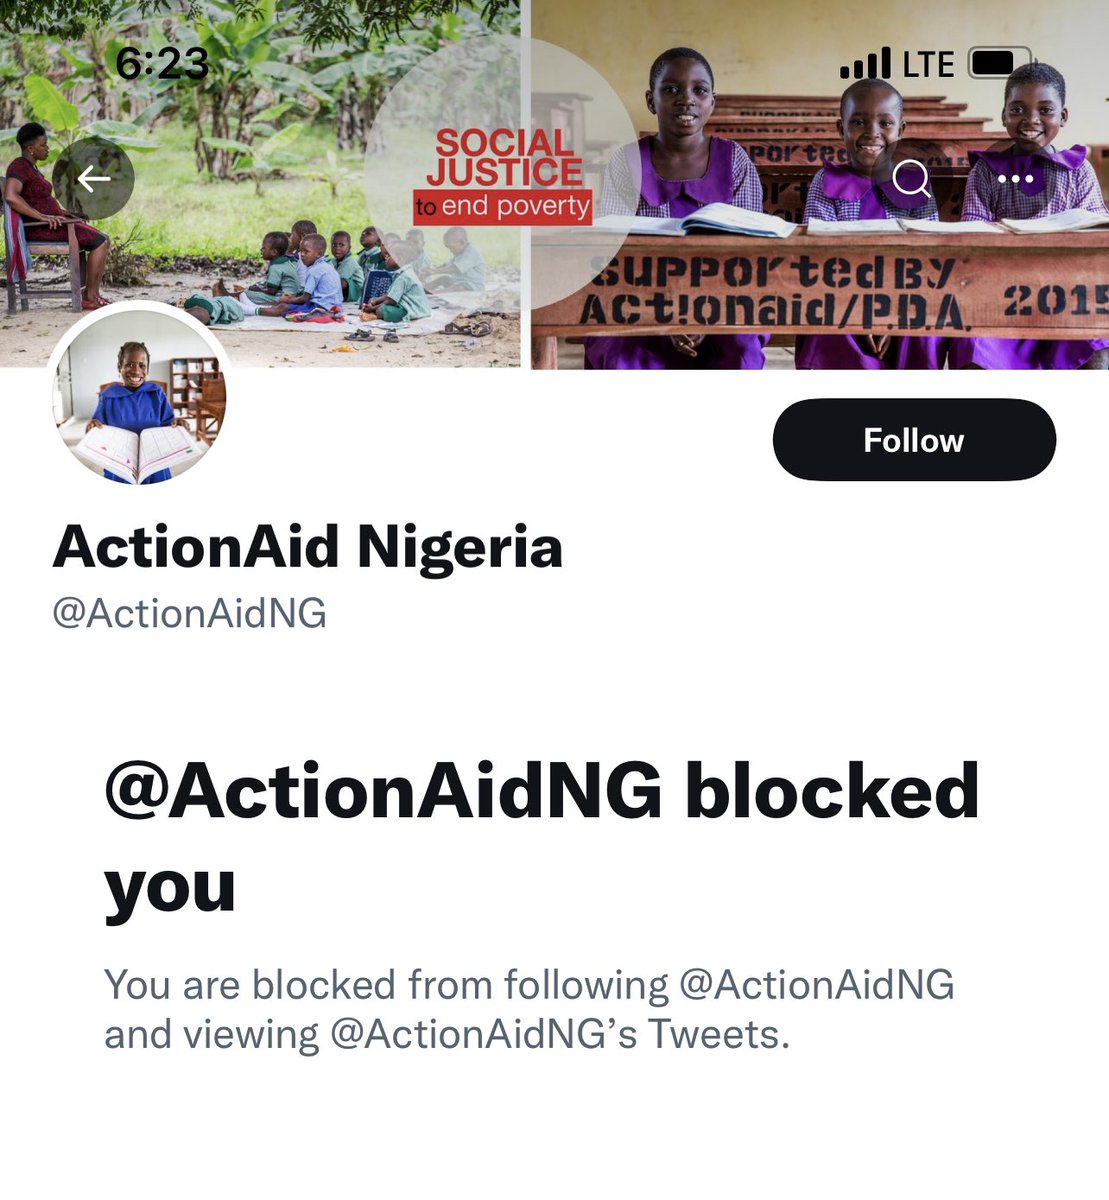 Hiaannnnn, grandma Ene Obi don vex too 🤣🤣🤣🤣🤣🤣🤣🤣🤣🤣 @FordFoundation @macfound @ActionAid @UKinNigeria I only asked simple question and arugbo ghana just blocked me, but why?